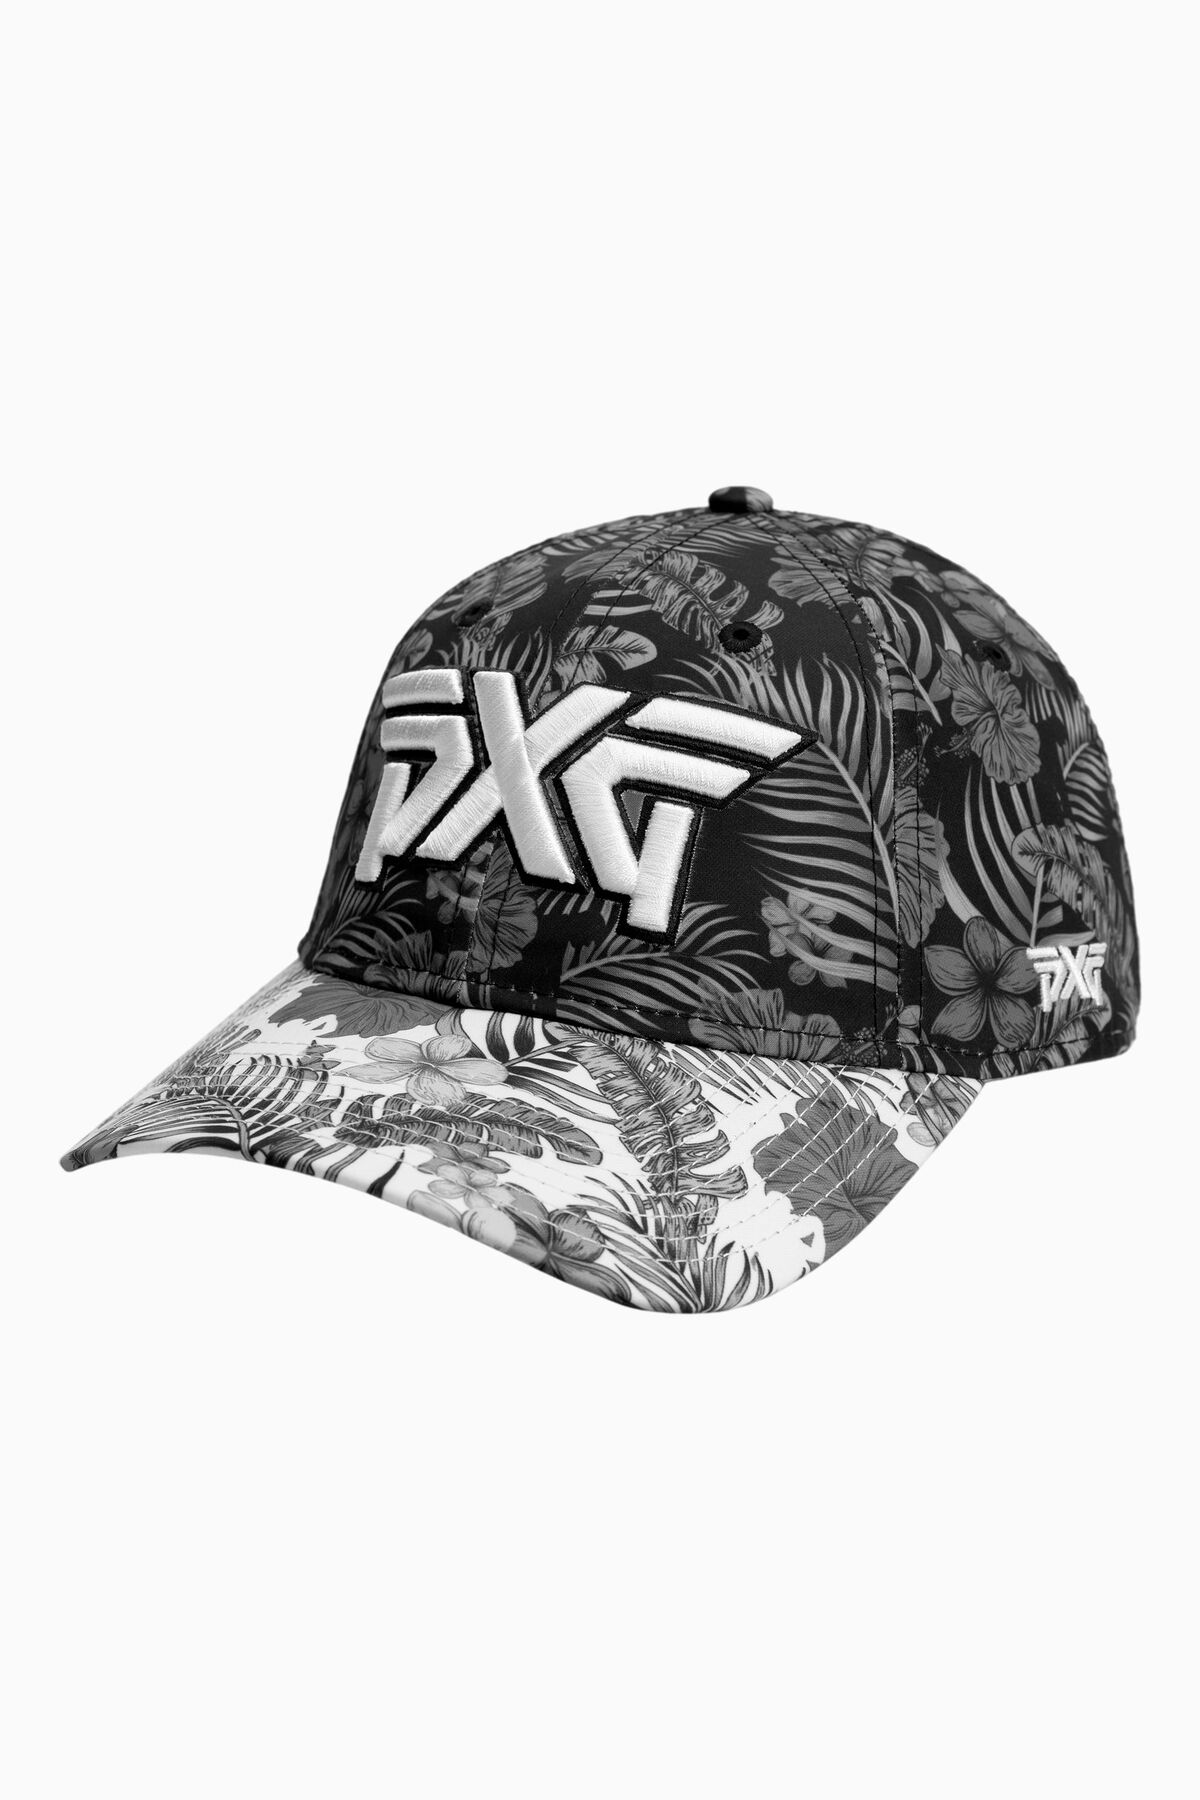 WOMEN'S ALOHA 2022 9TWENTY ADJUSTABLE CAP  Shop the Highest Quality Golf  Apparel, Gear, Accessories and Golf Clubs at PXG